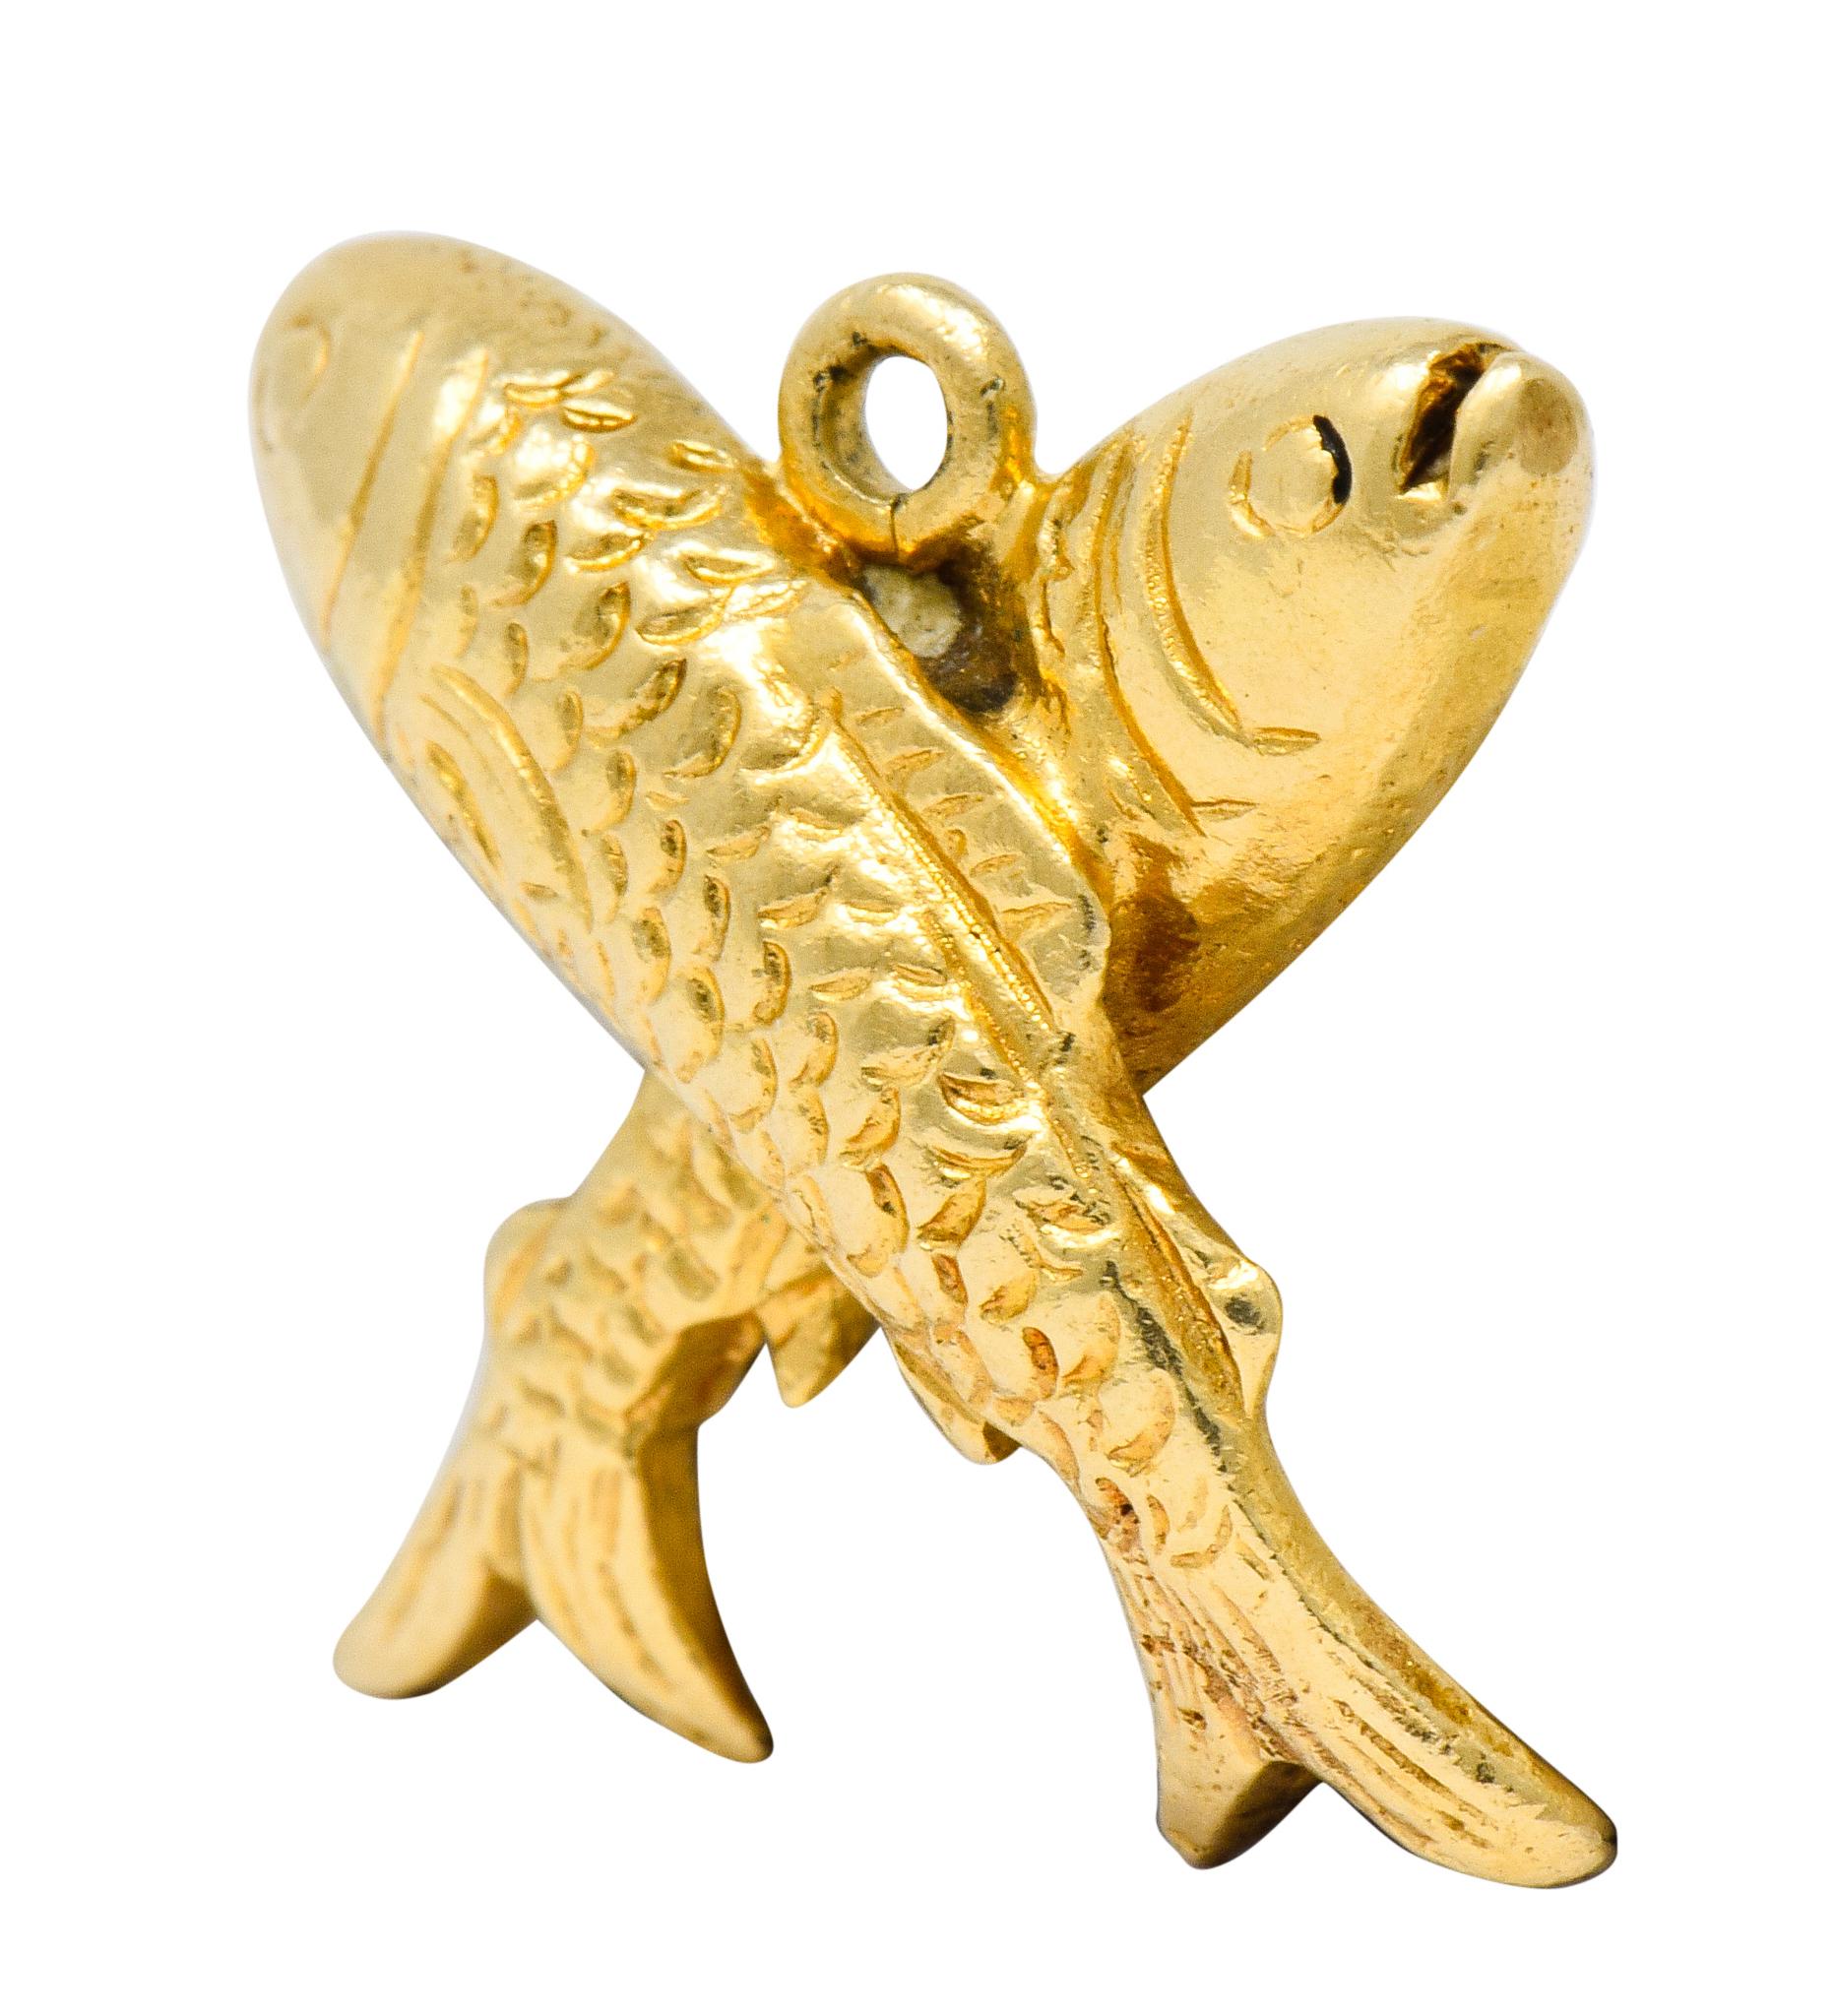 Charm designed as two fish crossed

Each with stylized faces and deeply engraved scalloped scales

Completed by jump ring bale

Tested as 14 karat gold

Circa: 1910

Measures: 1/2 x 5/8 inch

Total weight: 4.3 grams

Leaping. Double-Trouble.
